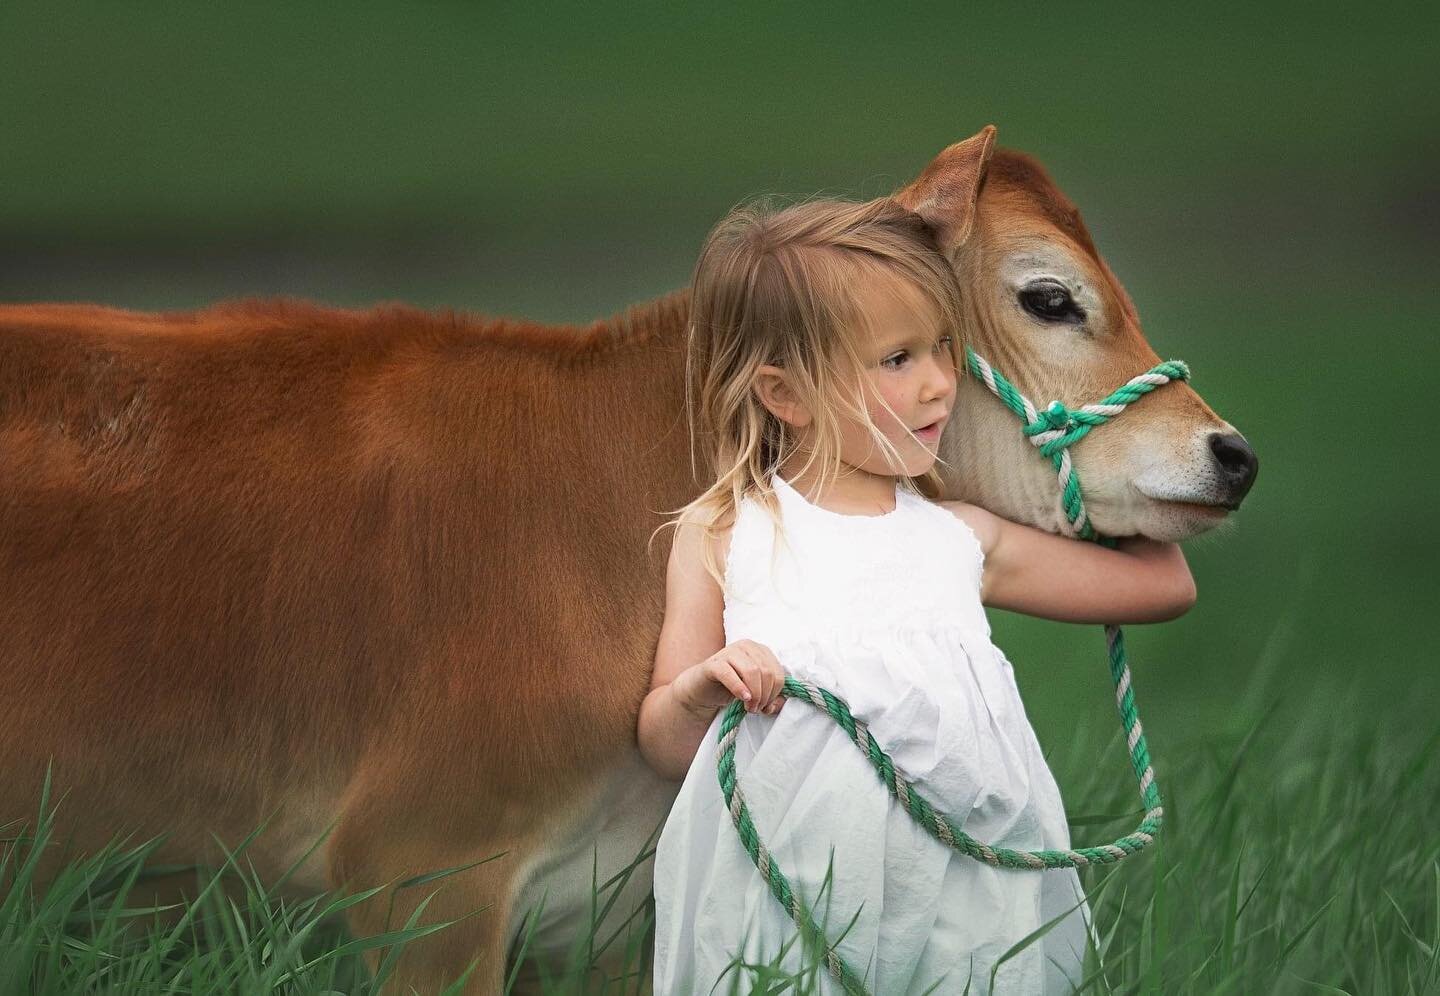 Little farm girls are tough little characters &mdash;-but they can sure be loving and gentle and sweet when it comes to animals! This picture reminds me of the old saying &ldquo;sugar and spice and everything nice&mdash;-that&rsquo;s what little girl